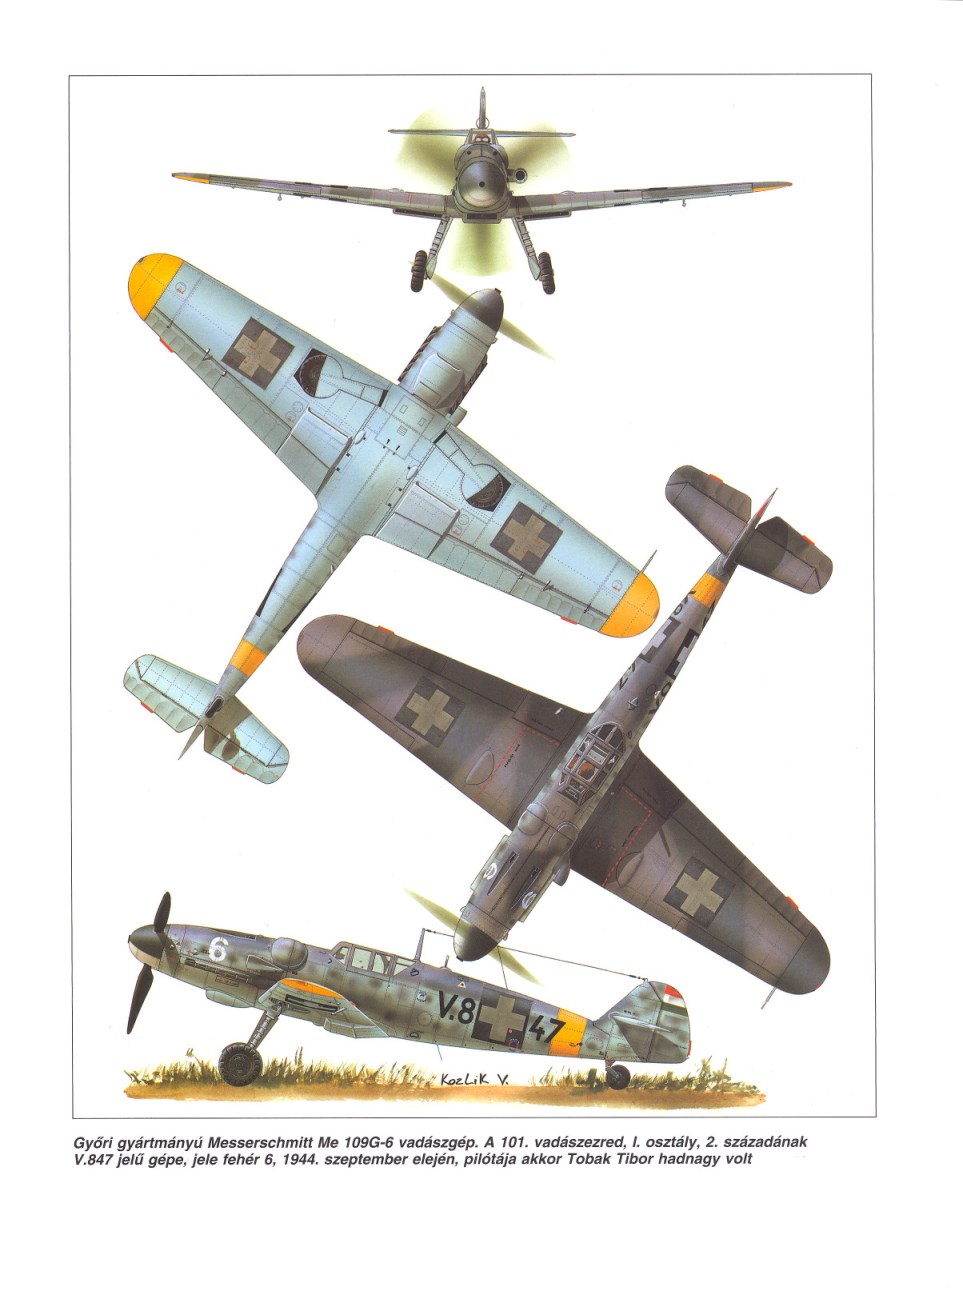 Hungarian Bf 109s